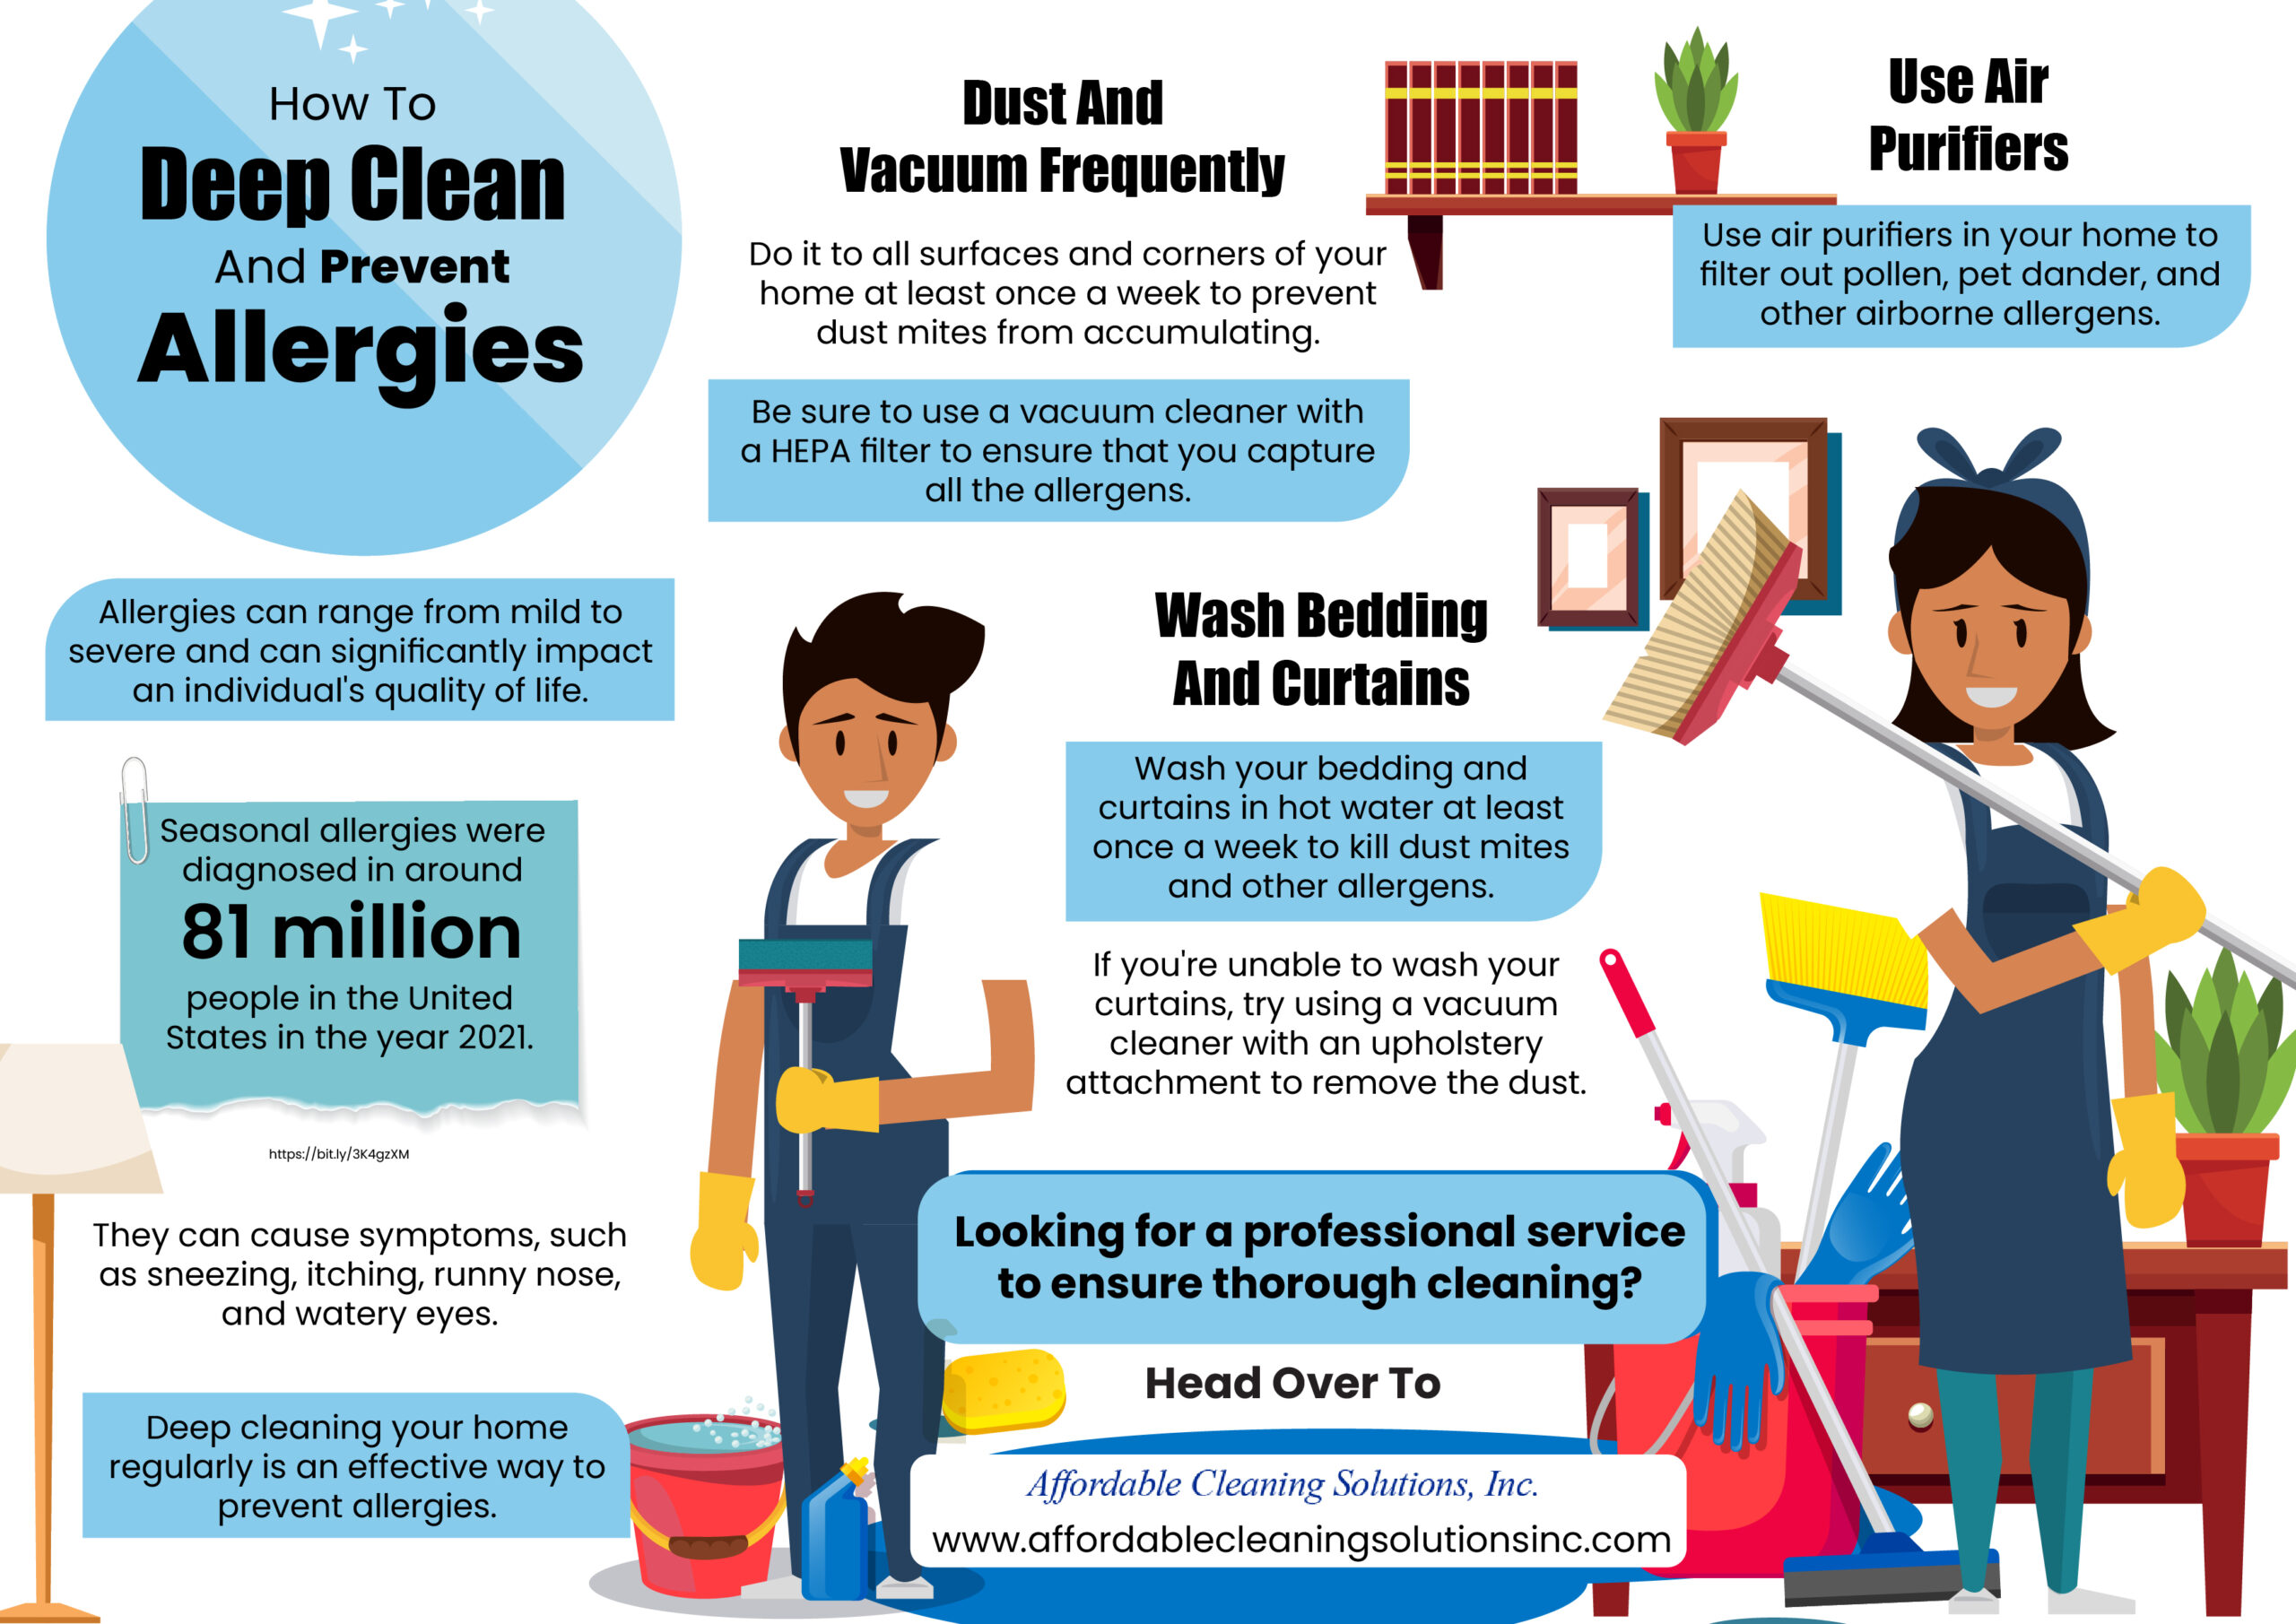 How To Deep Clean And Prevent Allergies